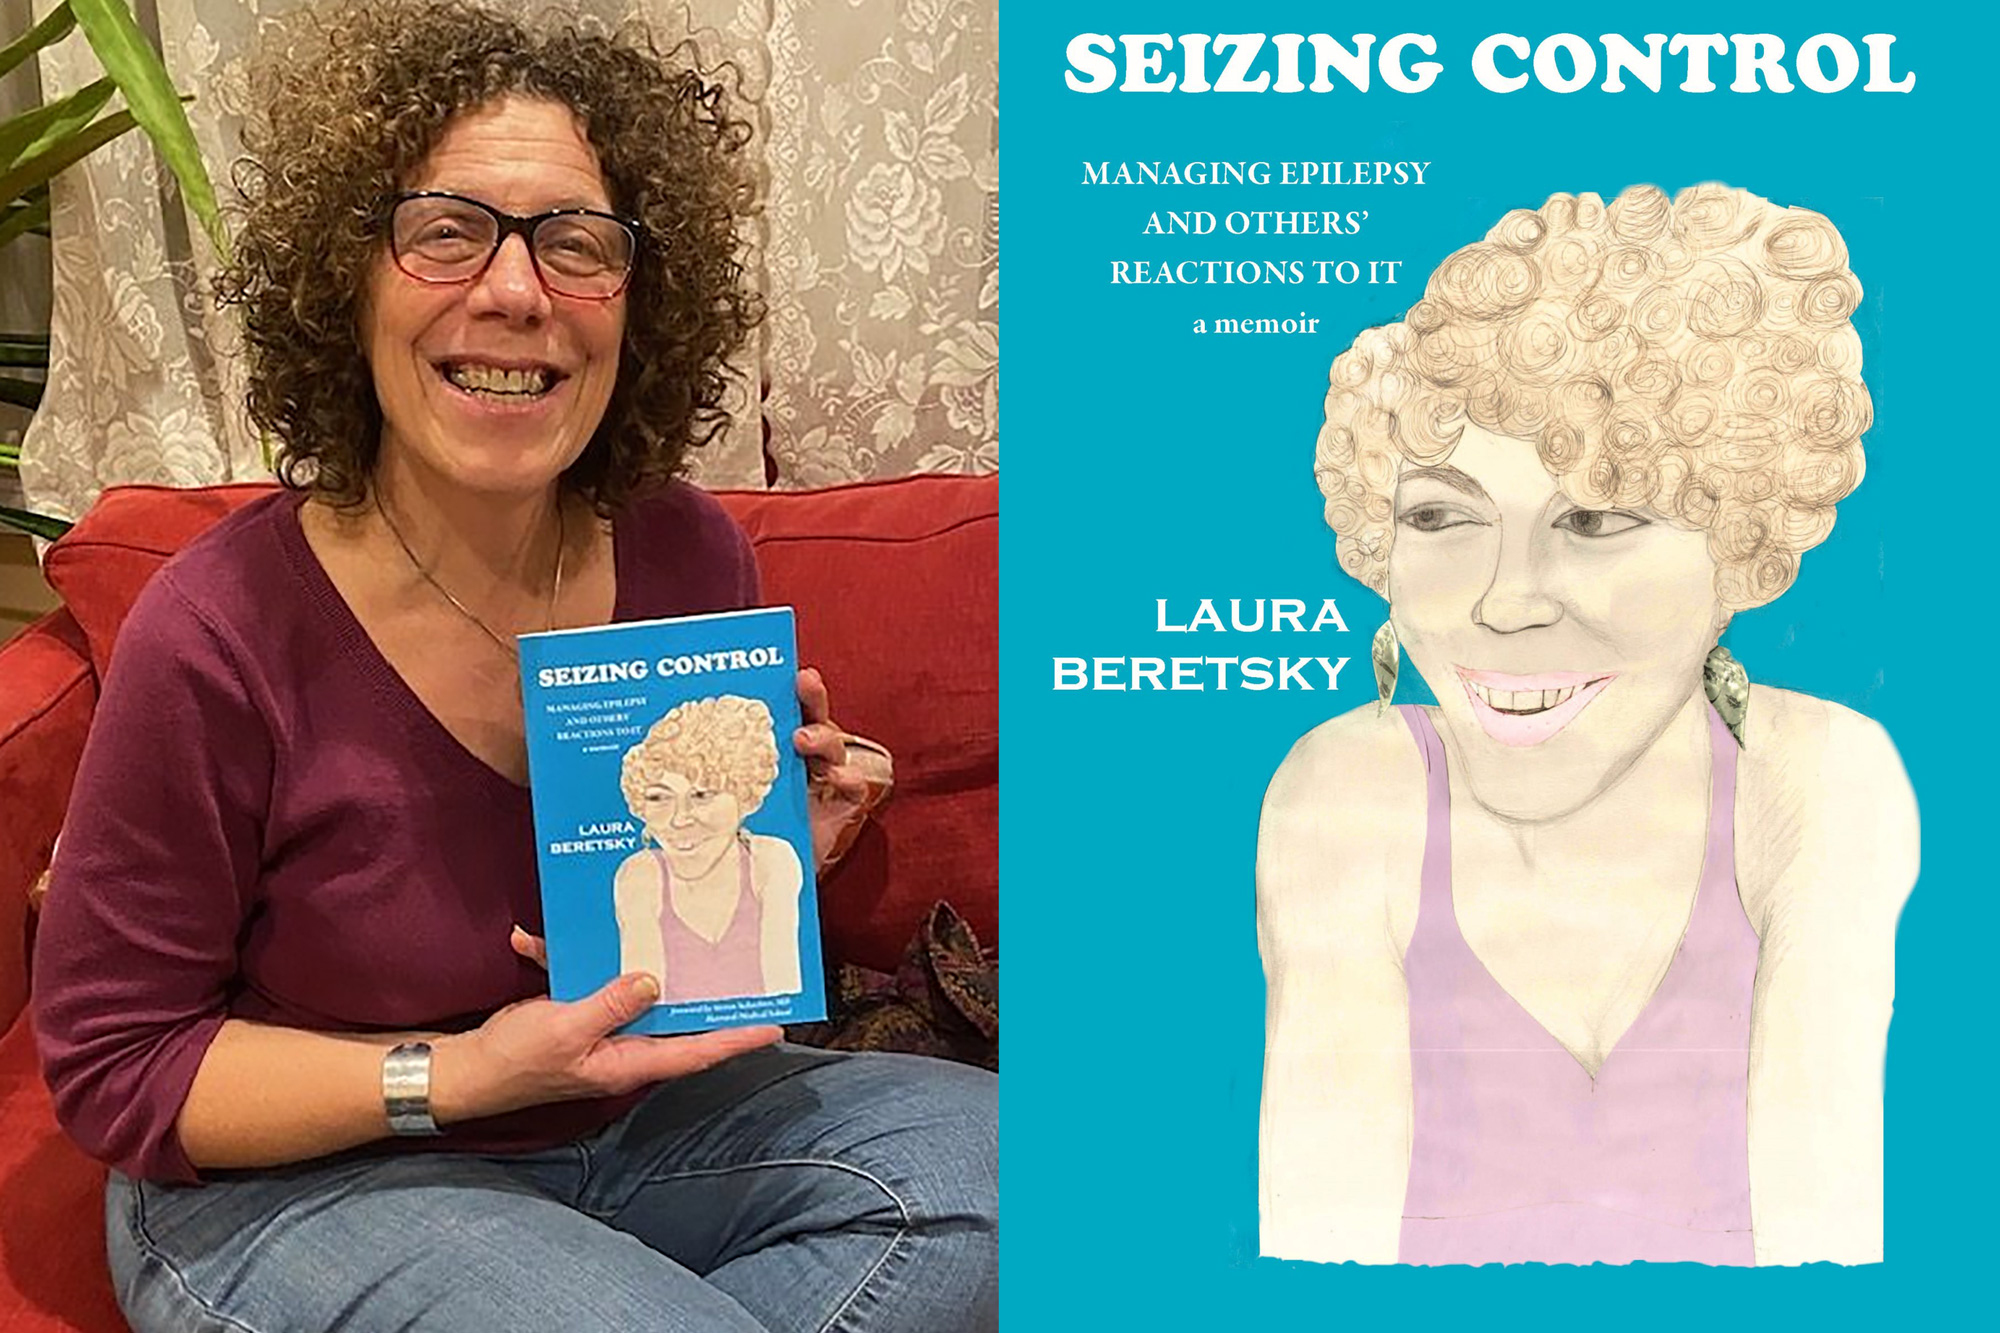 In her new book, “Seizing Control,” MITES grant writer Laura Beretsky details her experience with epilepsy and offers lessons for creating a welcoming environment for people with disabilities.